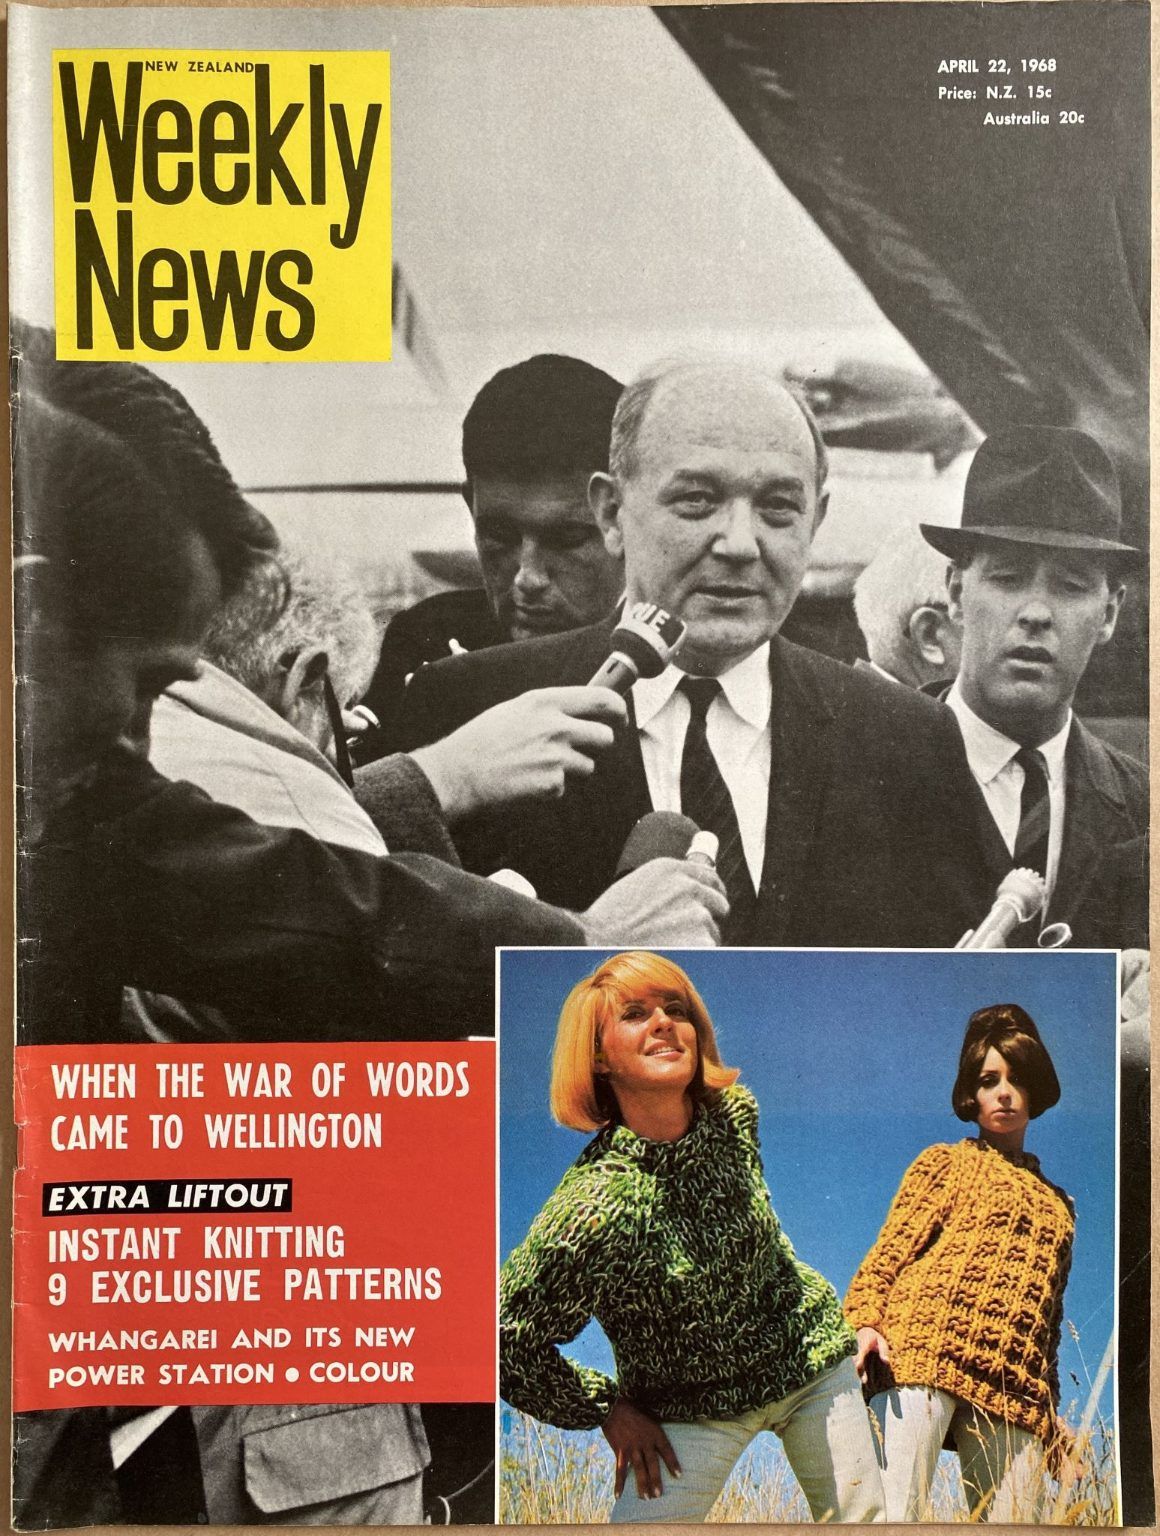 OLD NEWSPAPER: New Zealand Weekly News, 22 April 1968